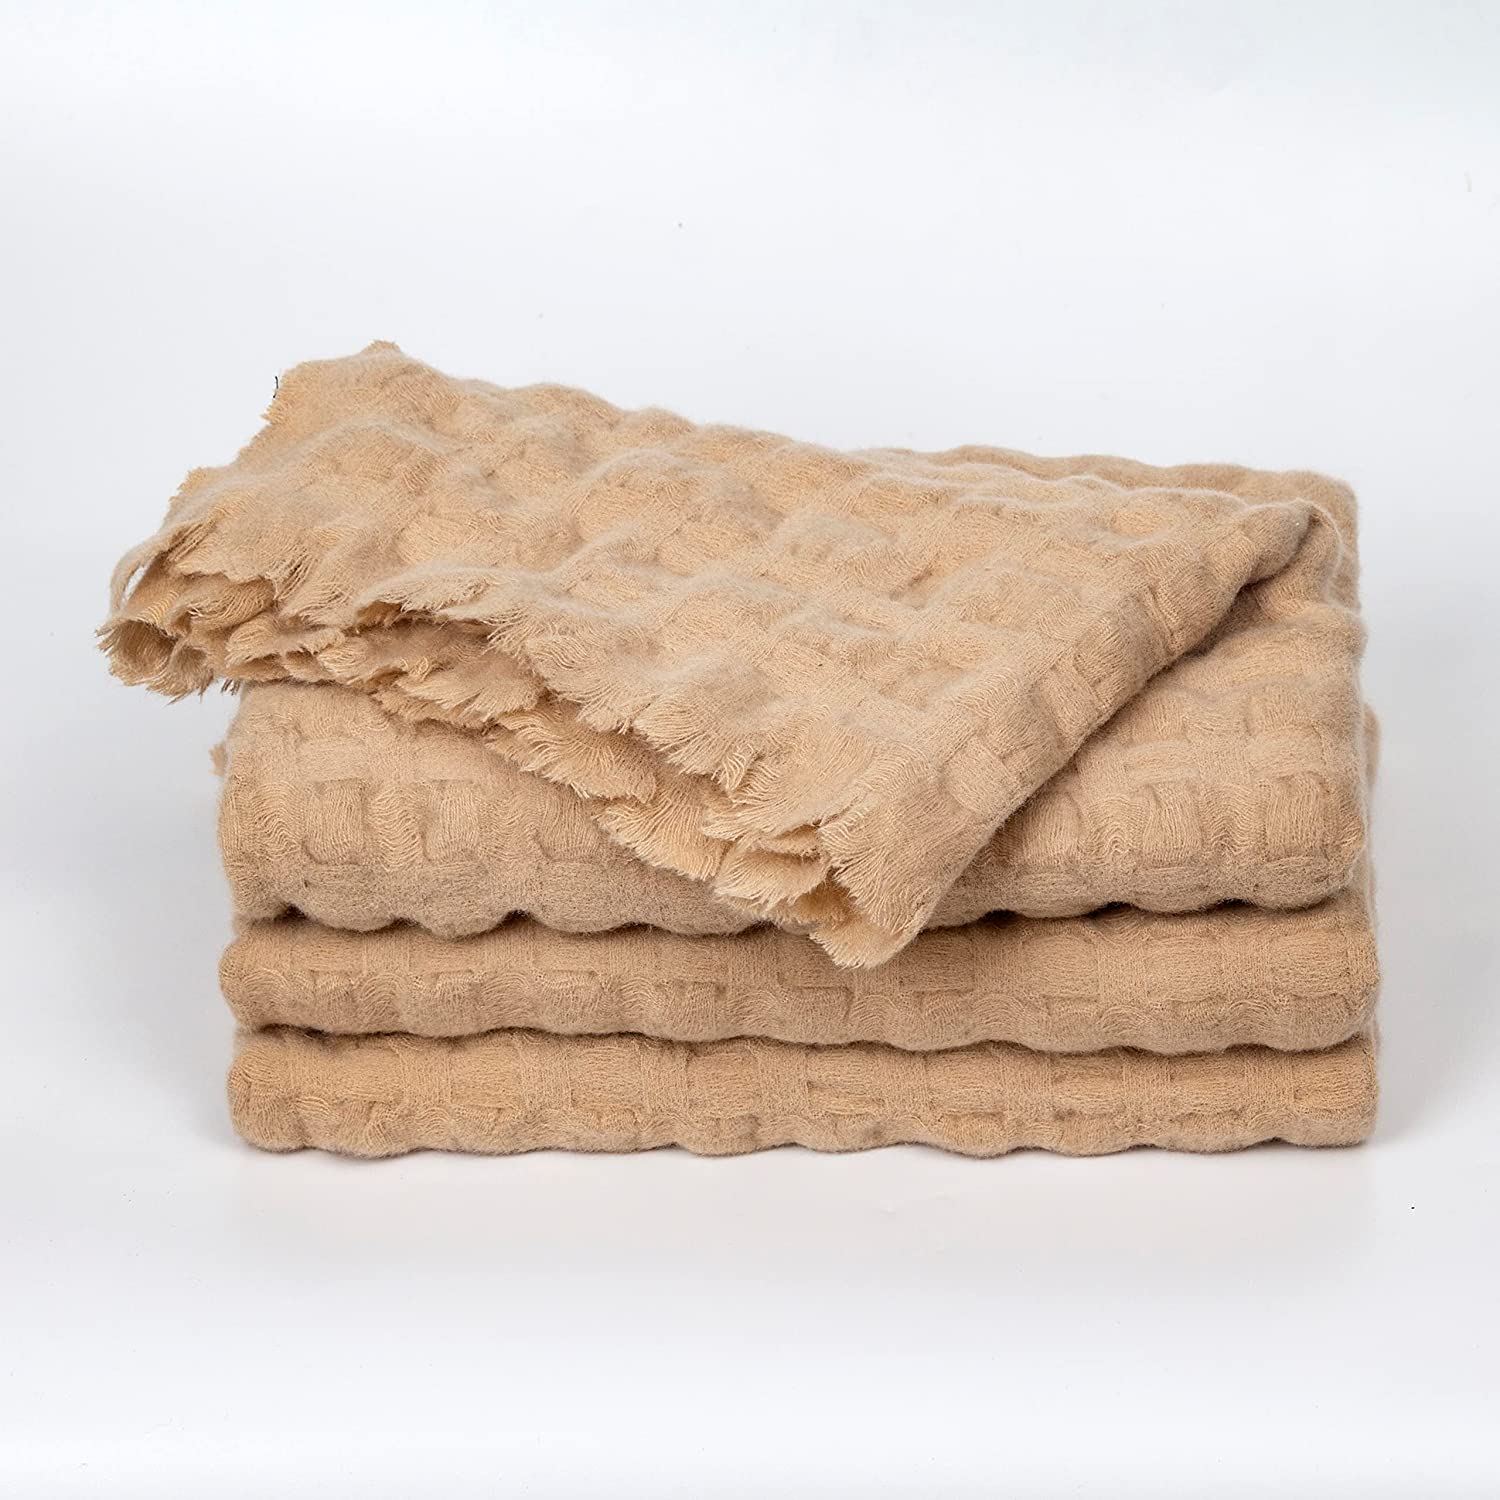 Amazon.com: Home Brushed Throw Blanket Reversible Sherpa & Brushed Fleece, Lightweight Home Decor for Bed or Couch, Latte Beige : Home & Kitchen $19.99